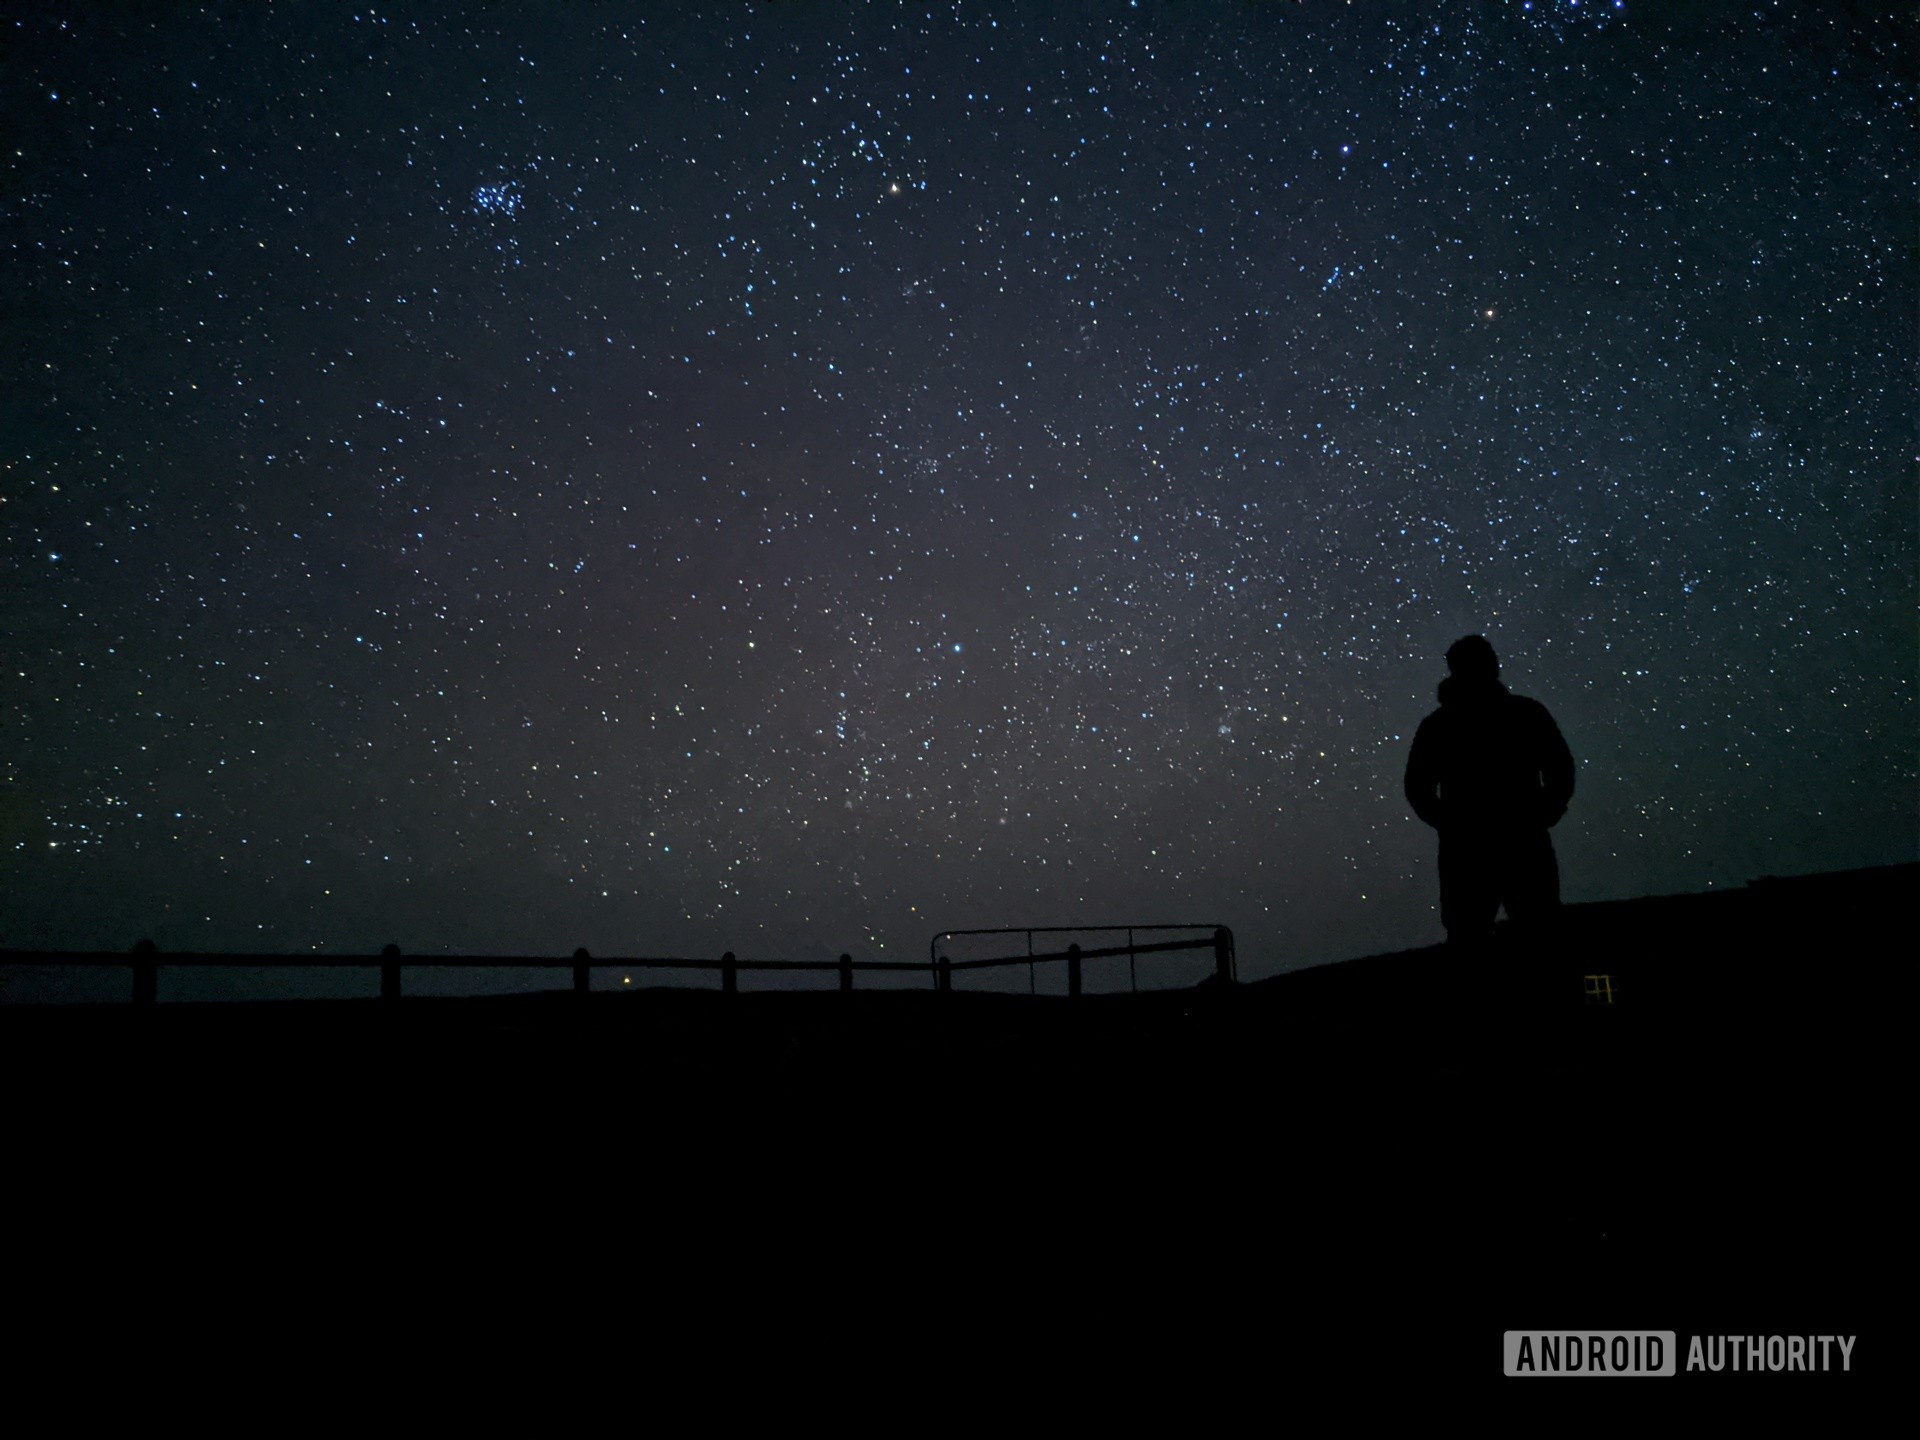 An astro shot complete with a silhouetted subject.